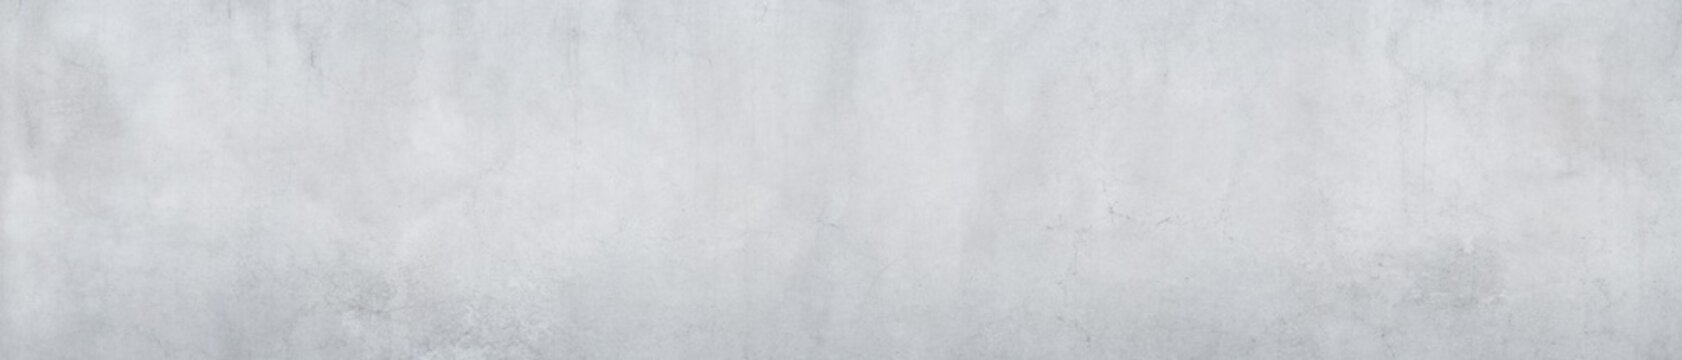 Panorama of a gray concrete wall as a background